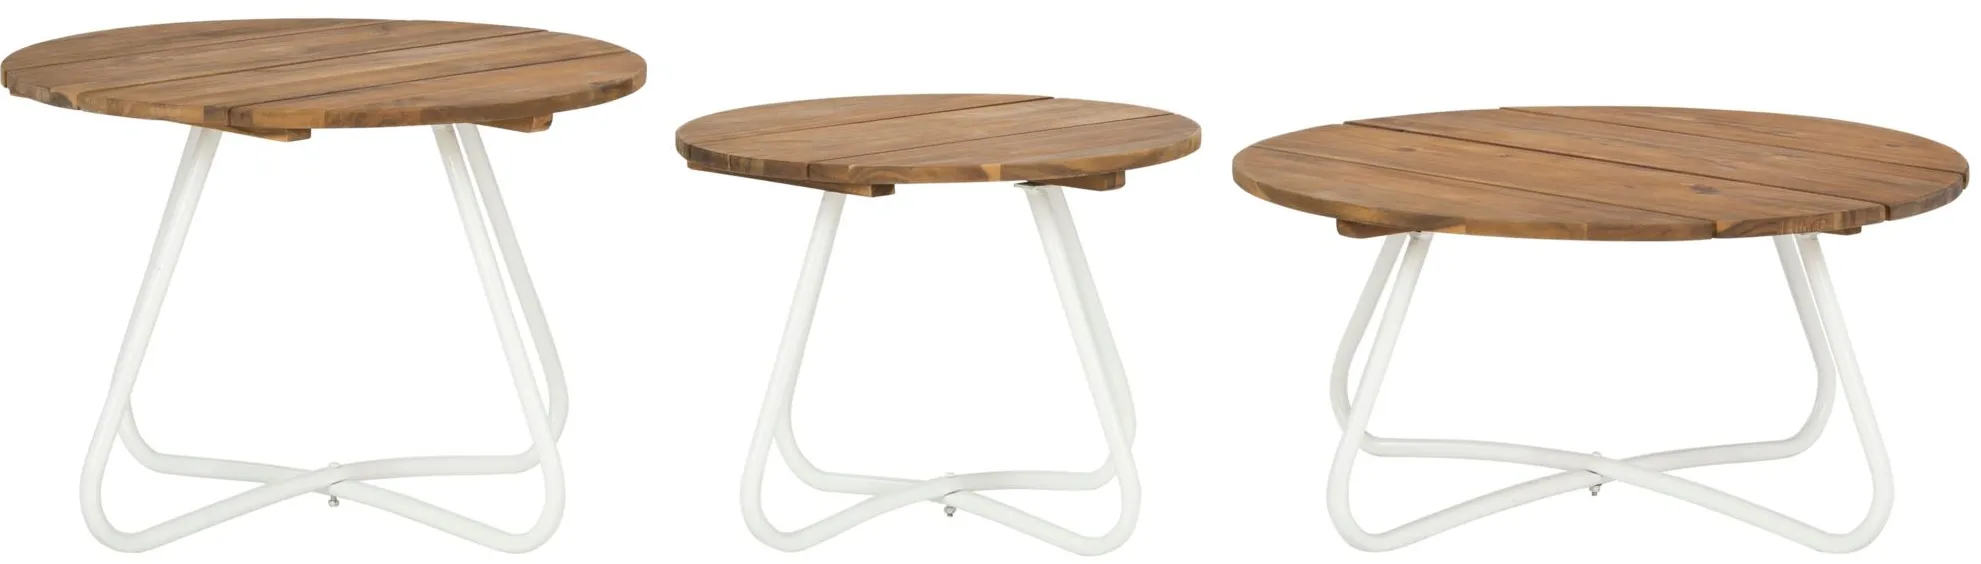 Akiko Outdoor 3 -pc Wood Top Coffee Table in White by Safavieh